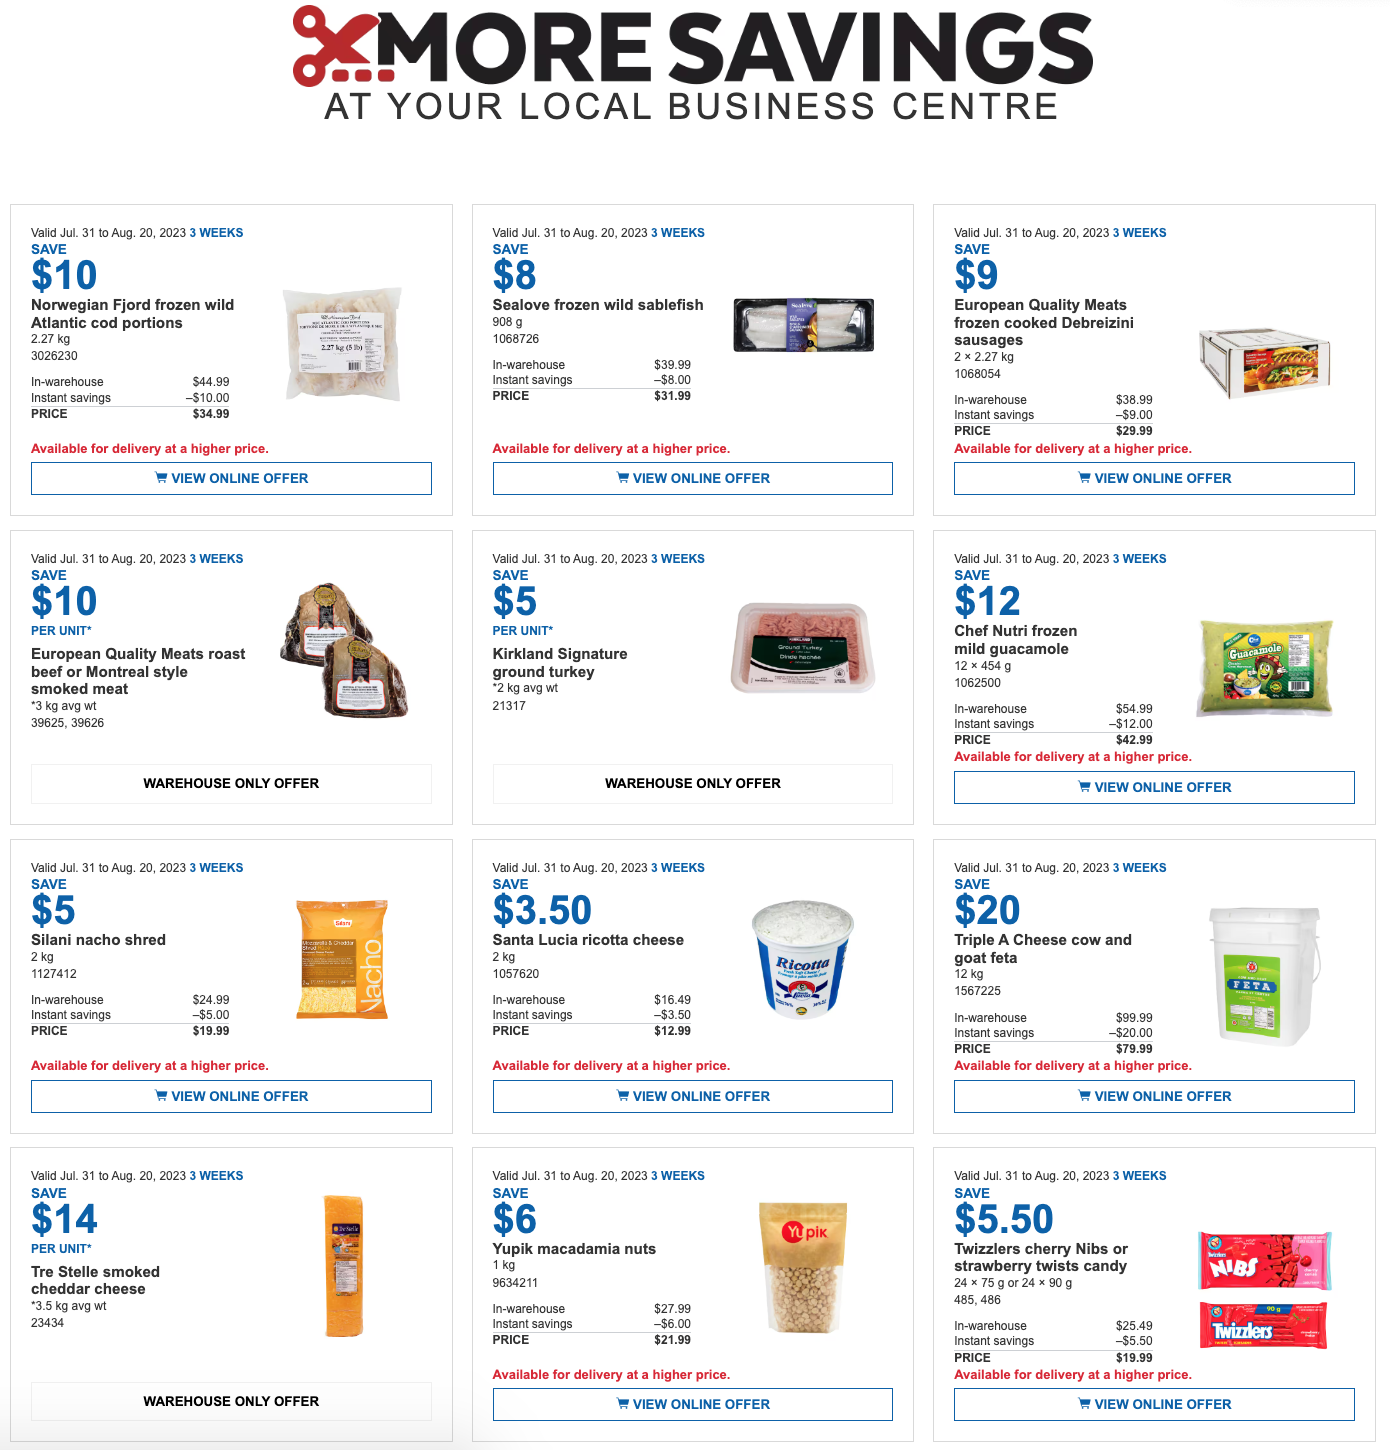 costco-canada-business-centre-instant-savings-coupons-flyer-until